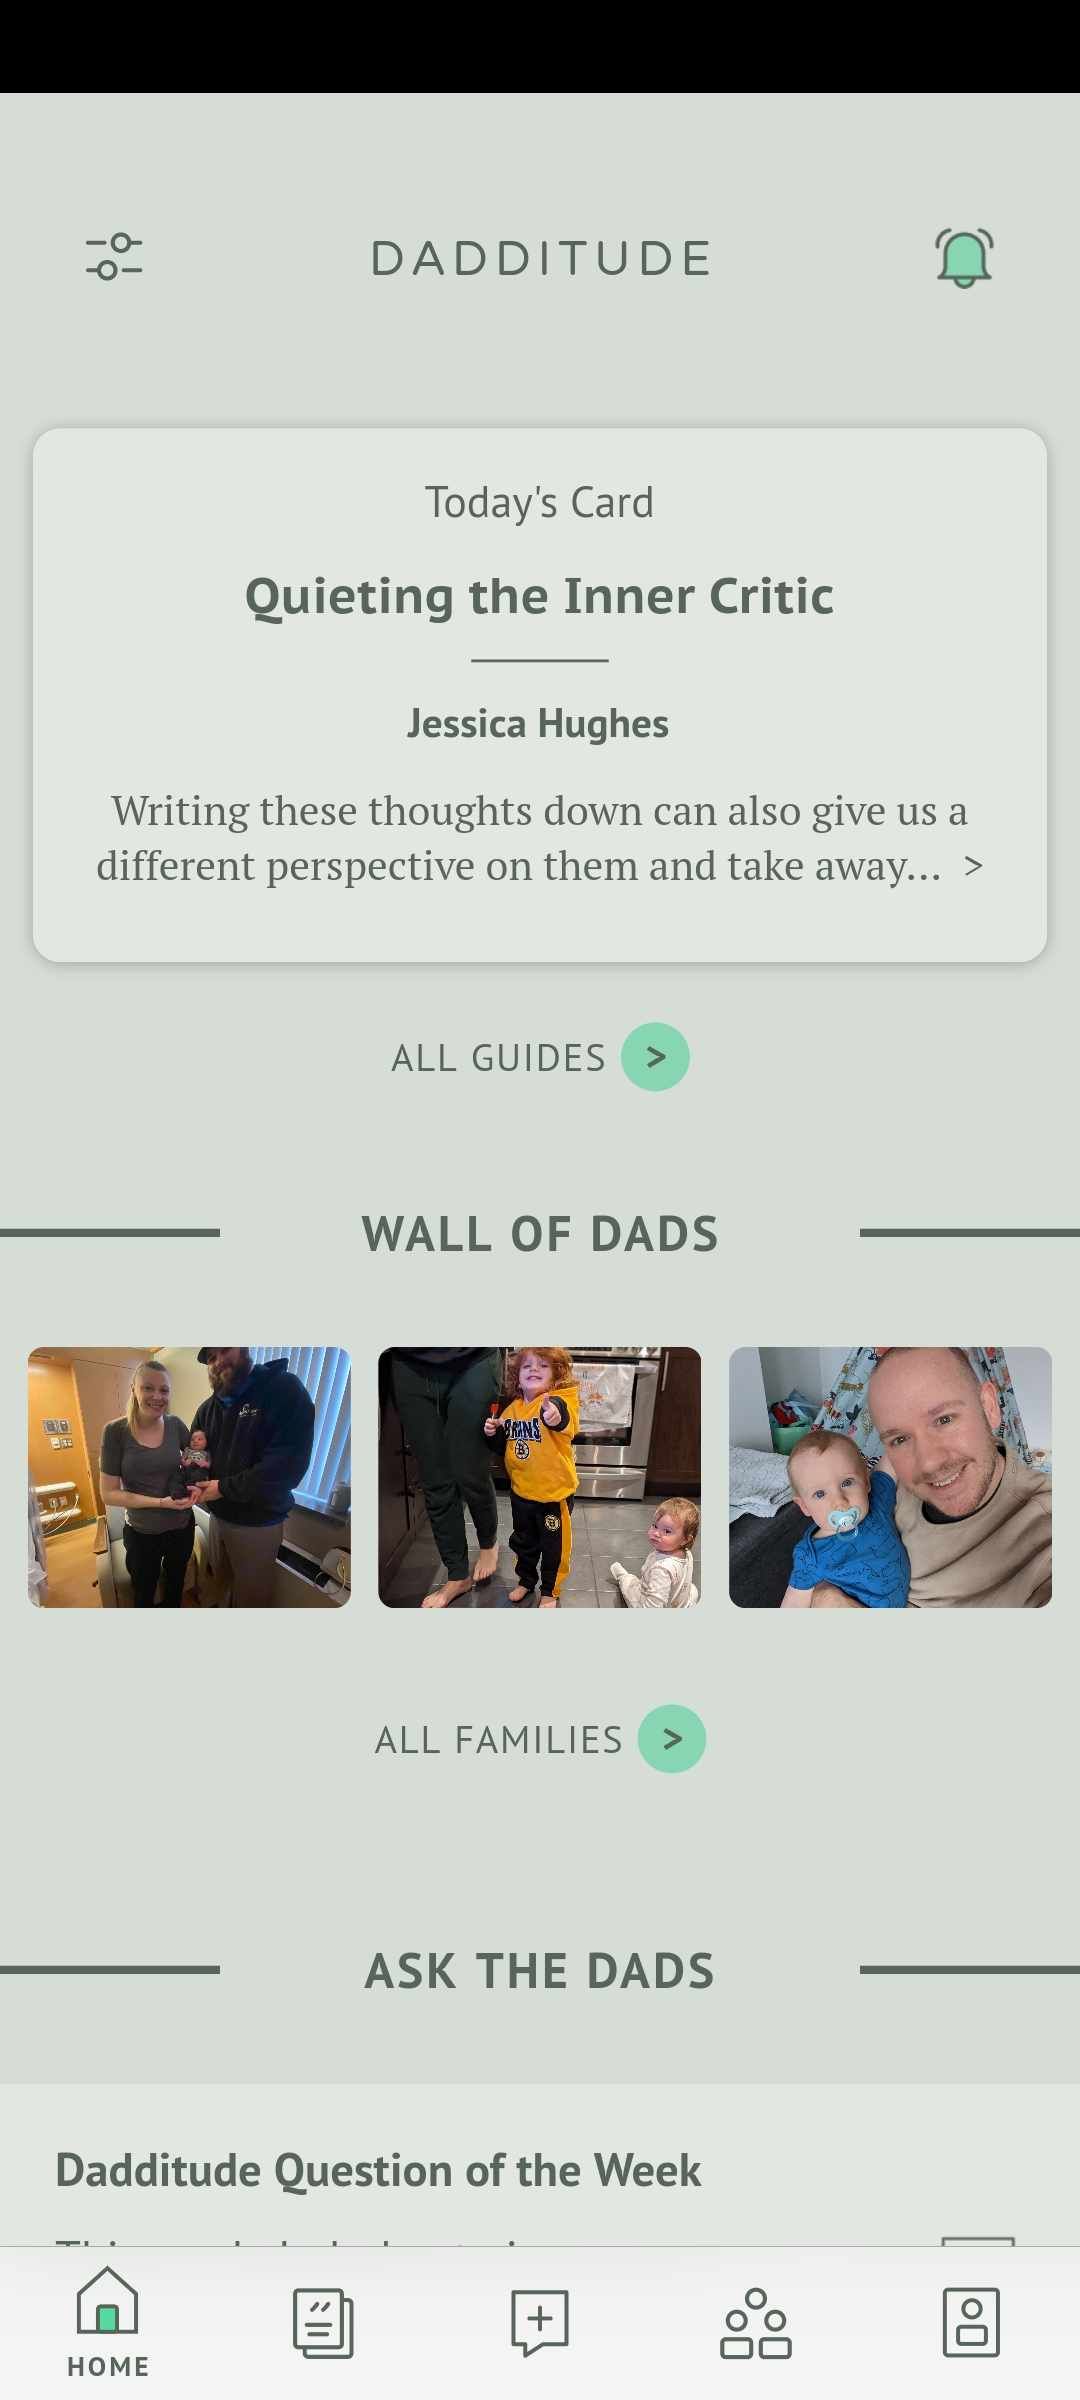 Dadditude is an ad-free app for dads to learn to be better fathers through growth guides and community help 